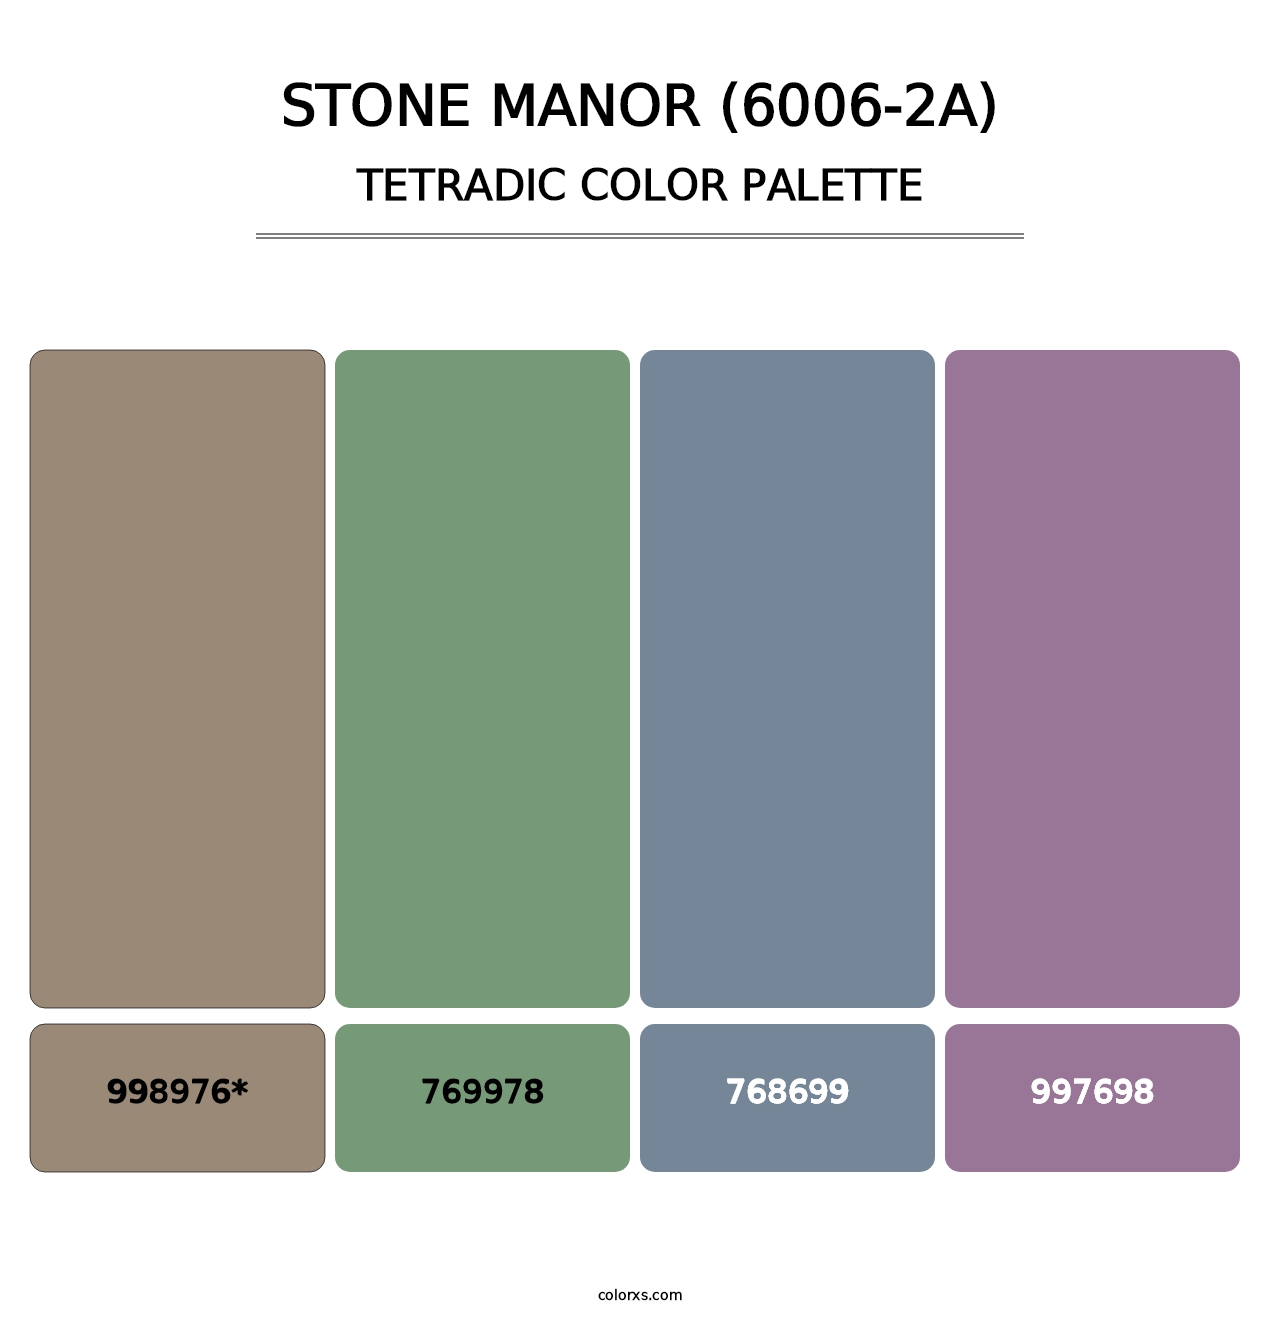 Stone Manor (6006-2A) - Tetradic Color Palette